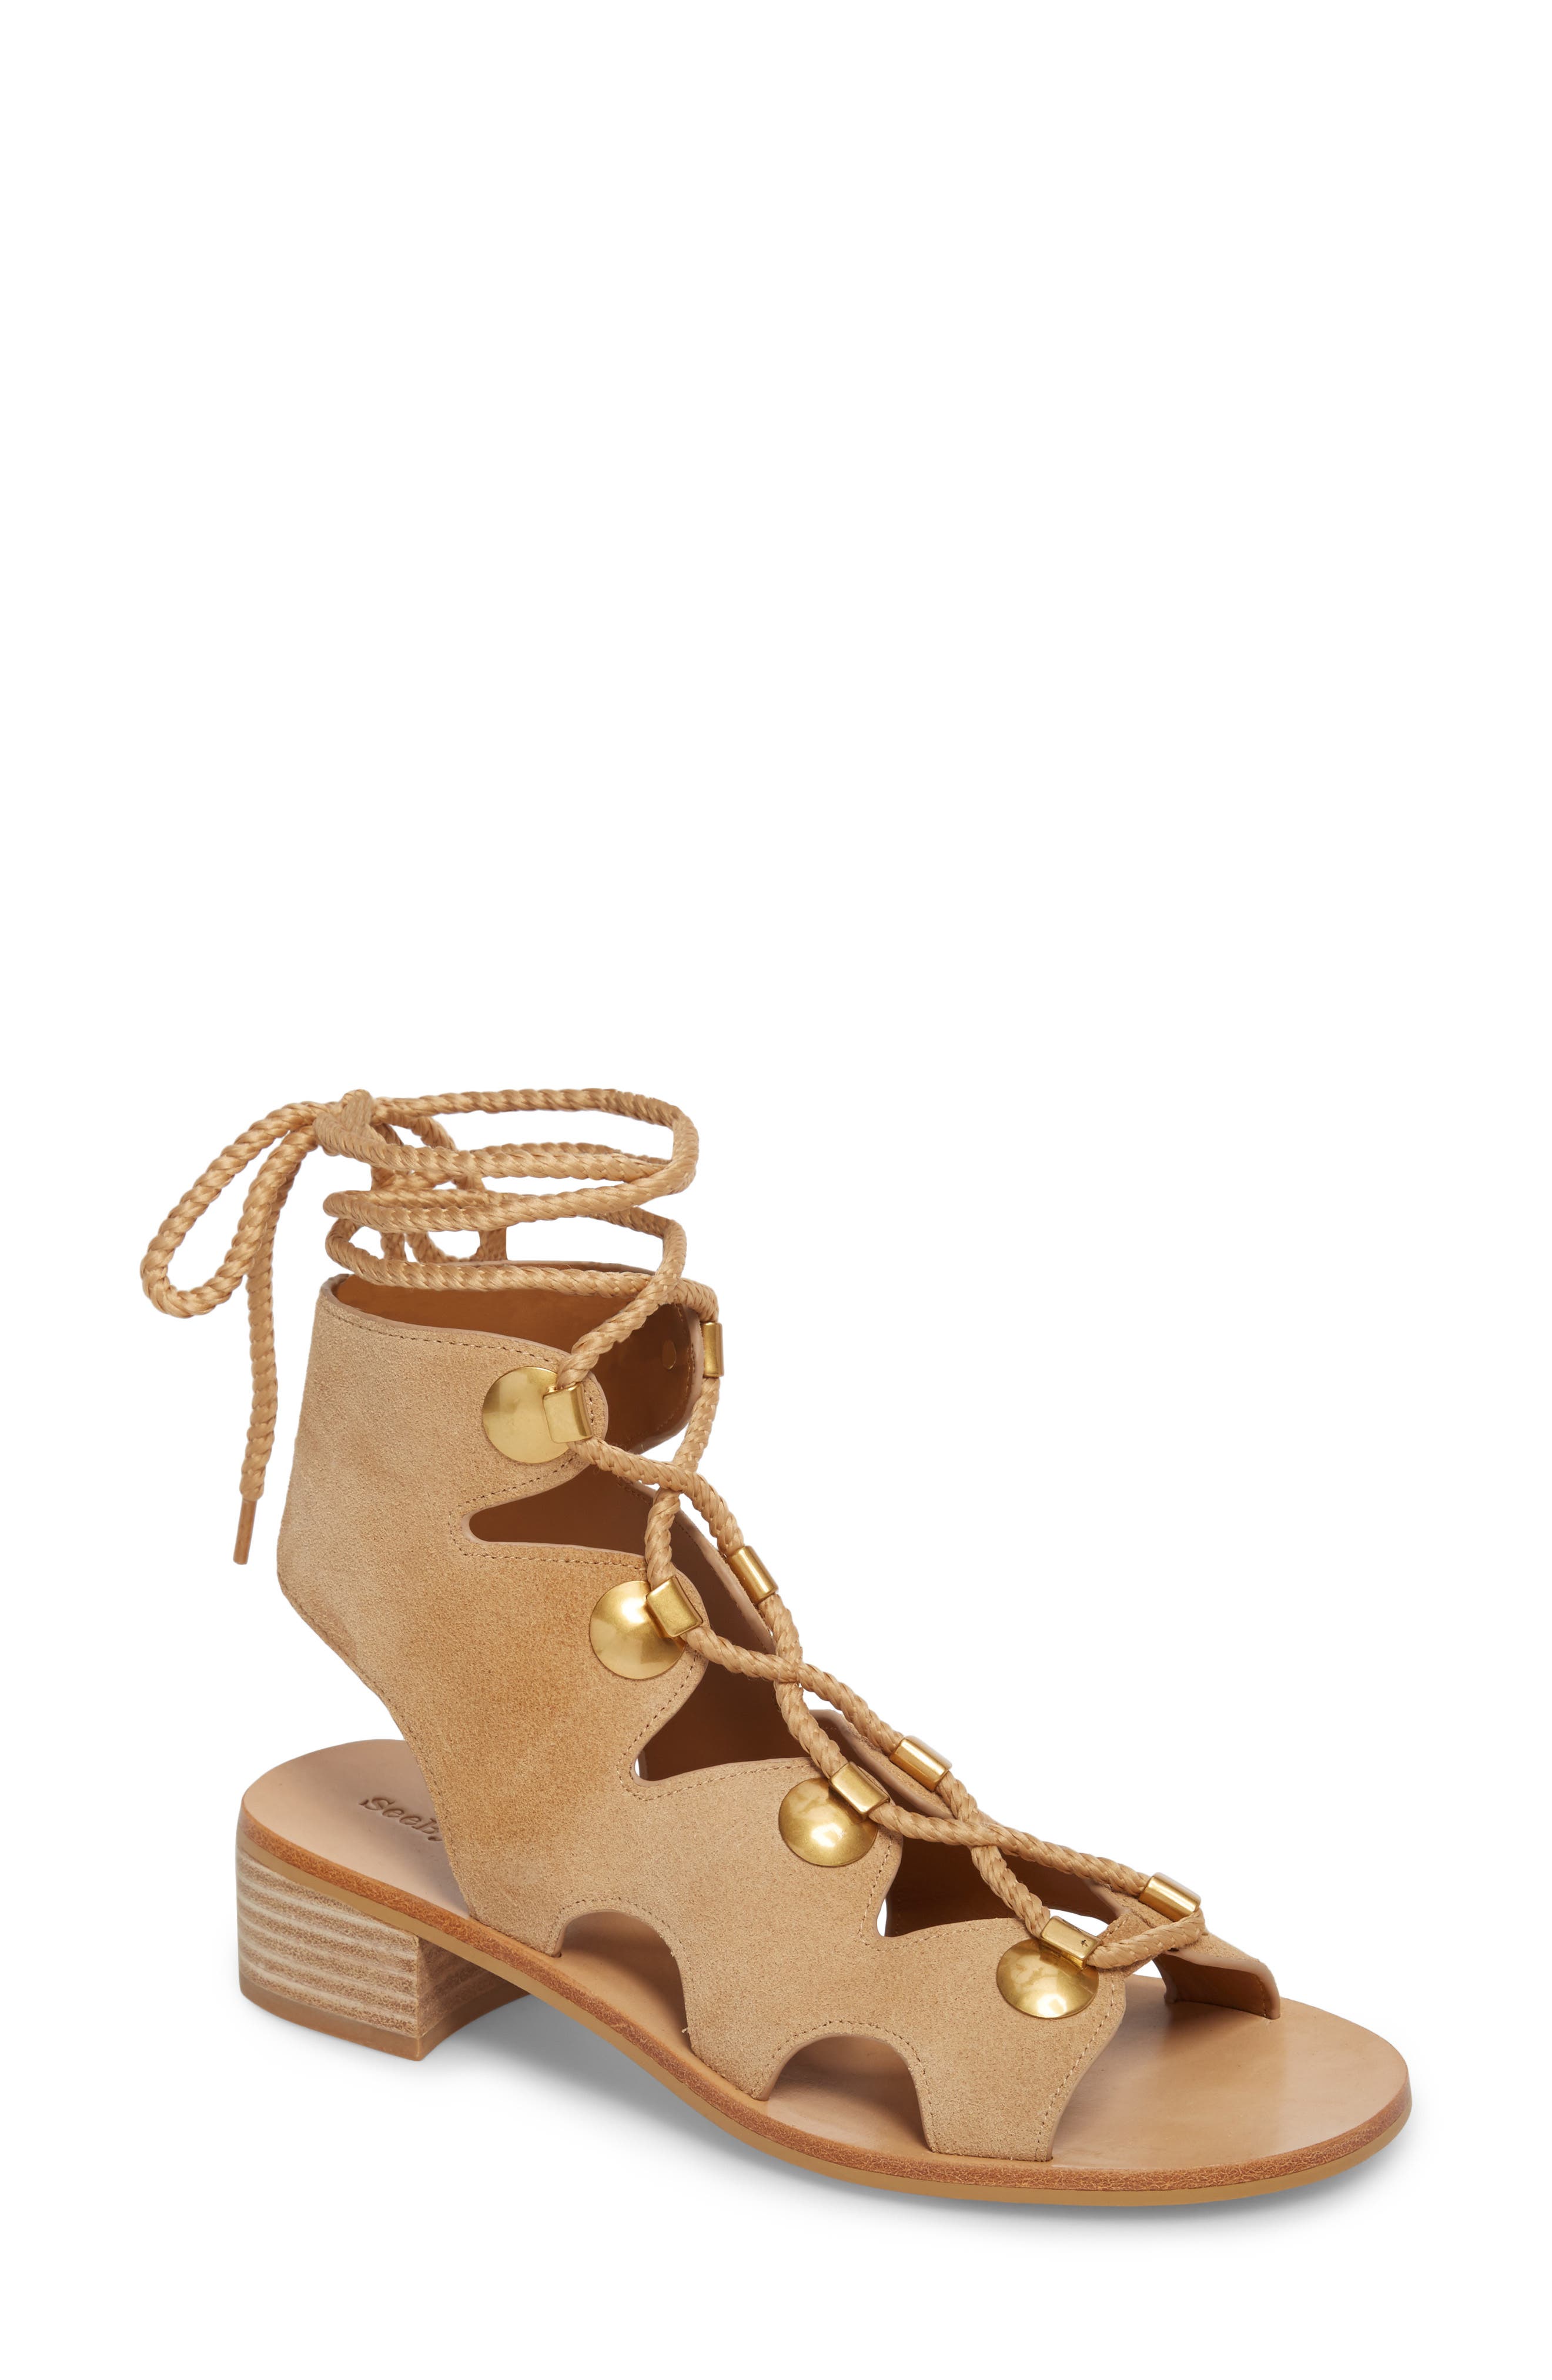 see by chloe gladiator sandals